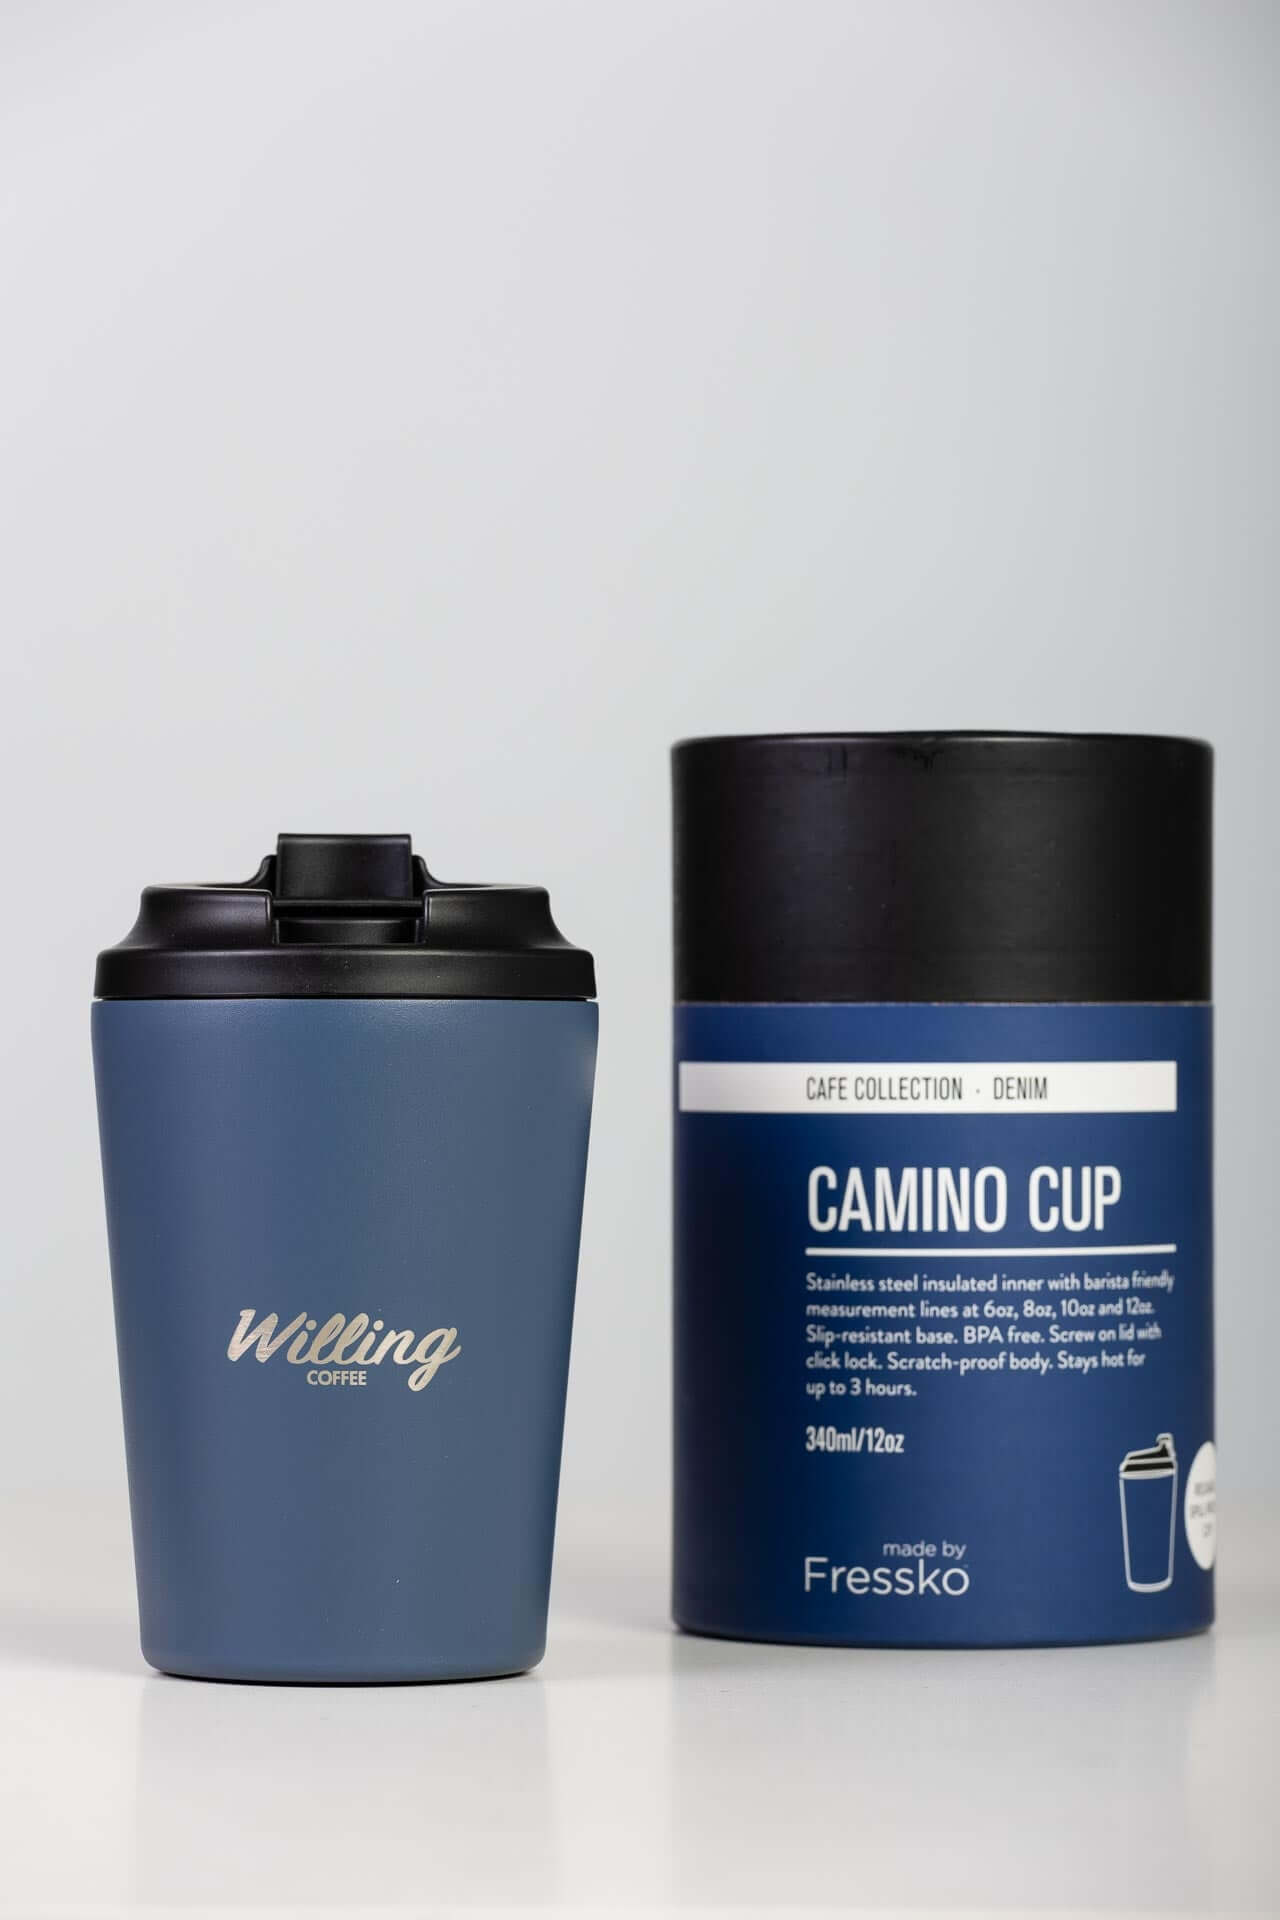 8oz Navy Keep Cup from Willing Coffee - Eco-friendly, spill-proof lid, textured exterior for enhanced grip. Ideal for hot/cold drinks on the go, includes storage tube.